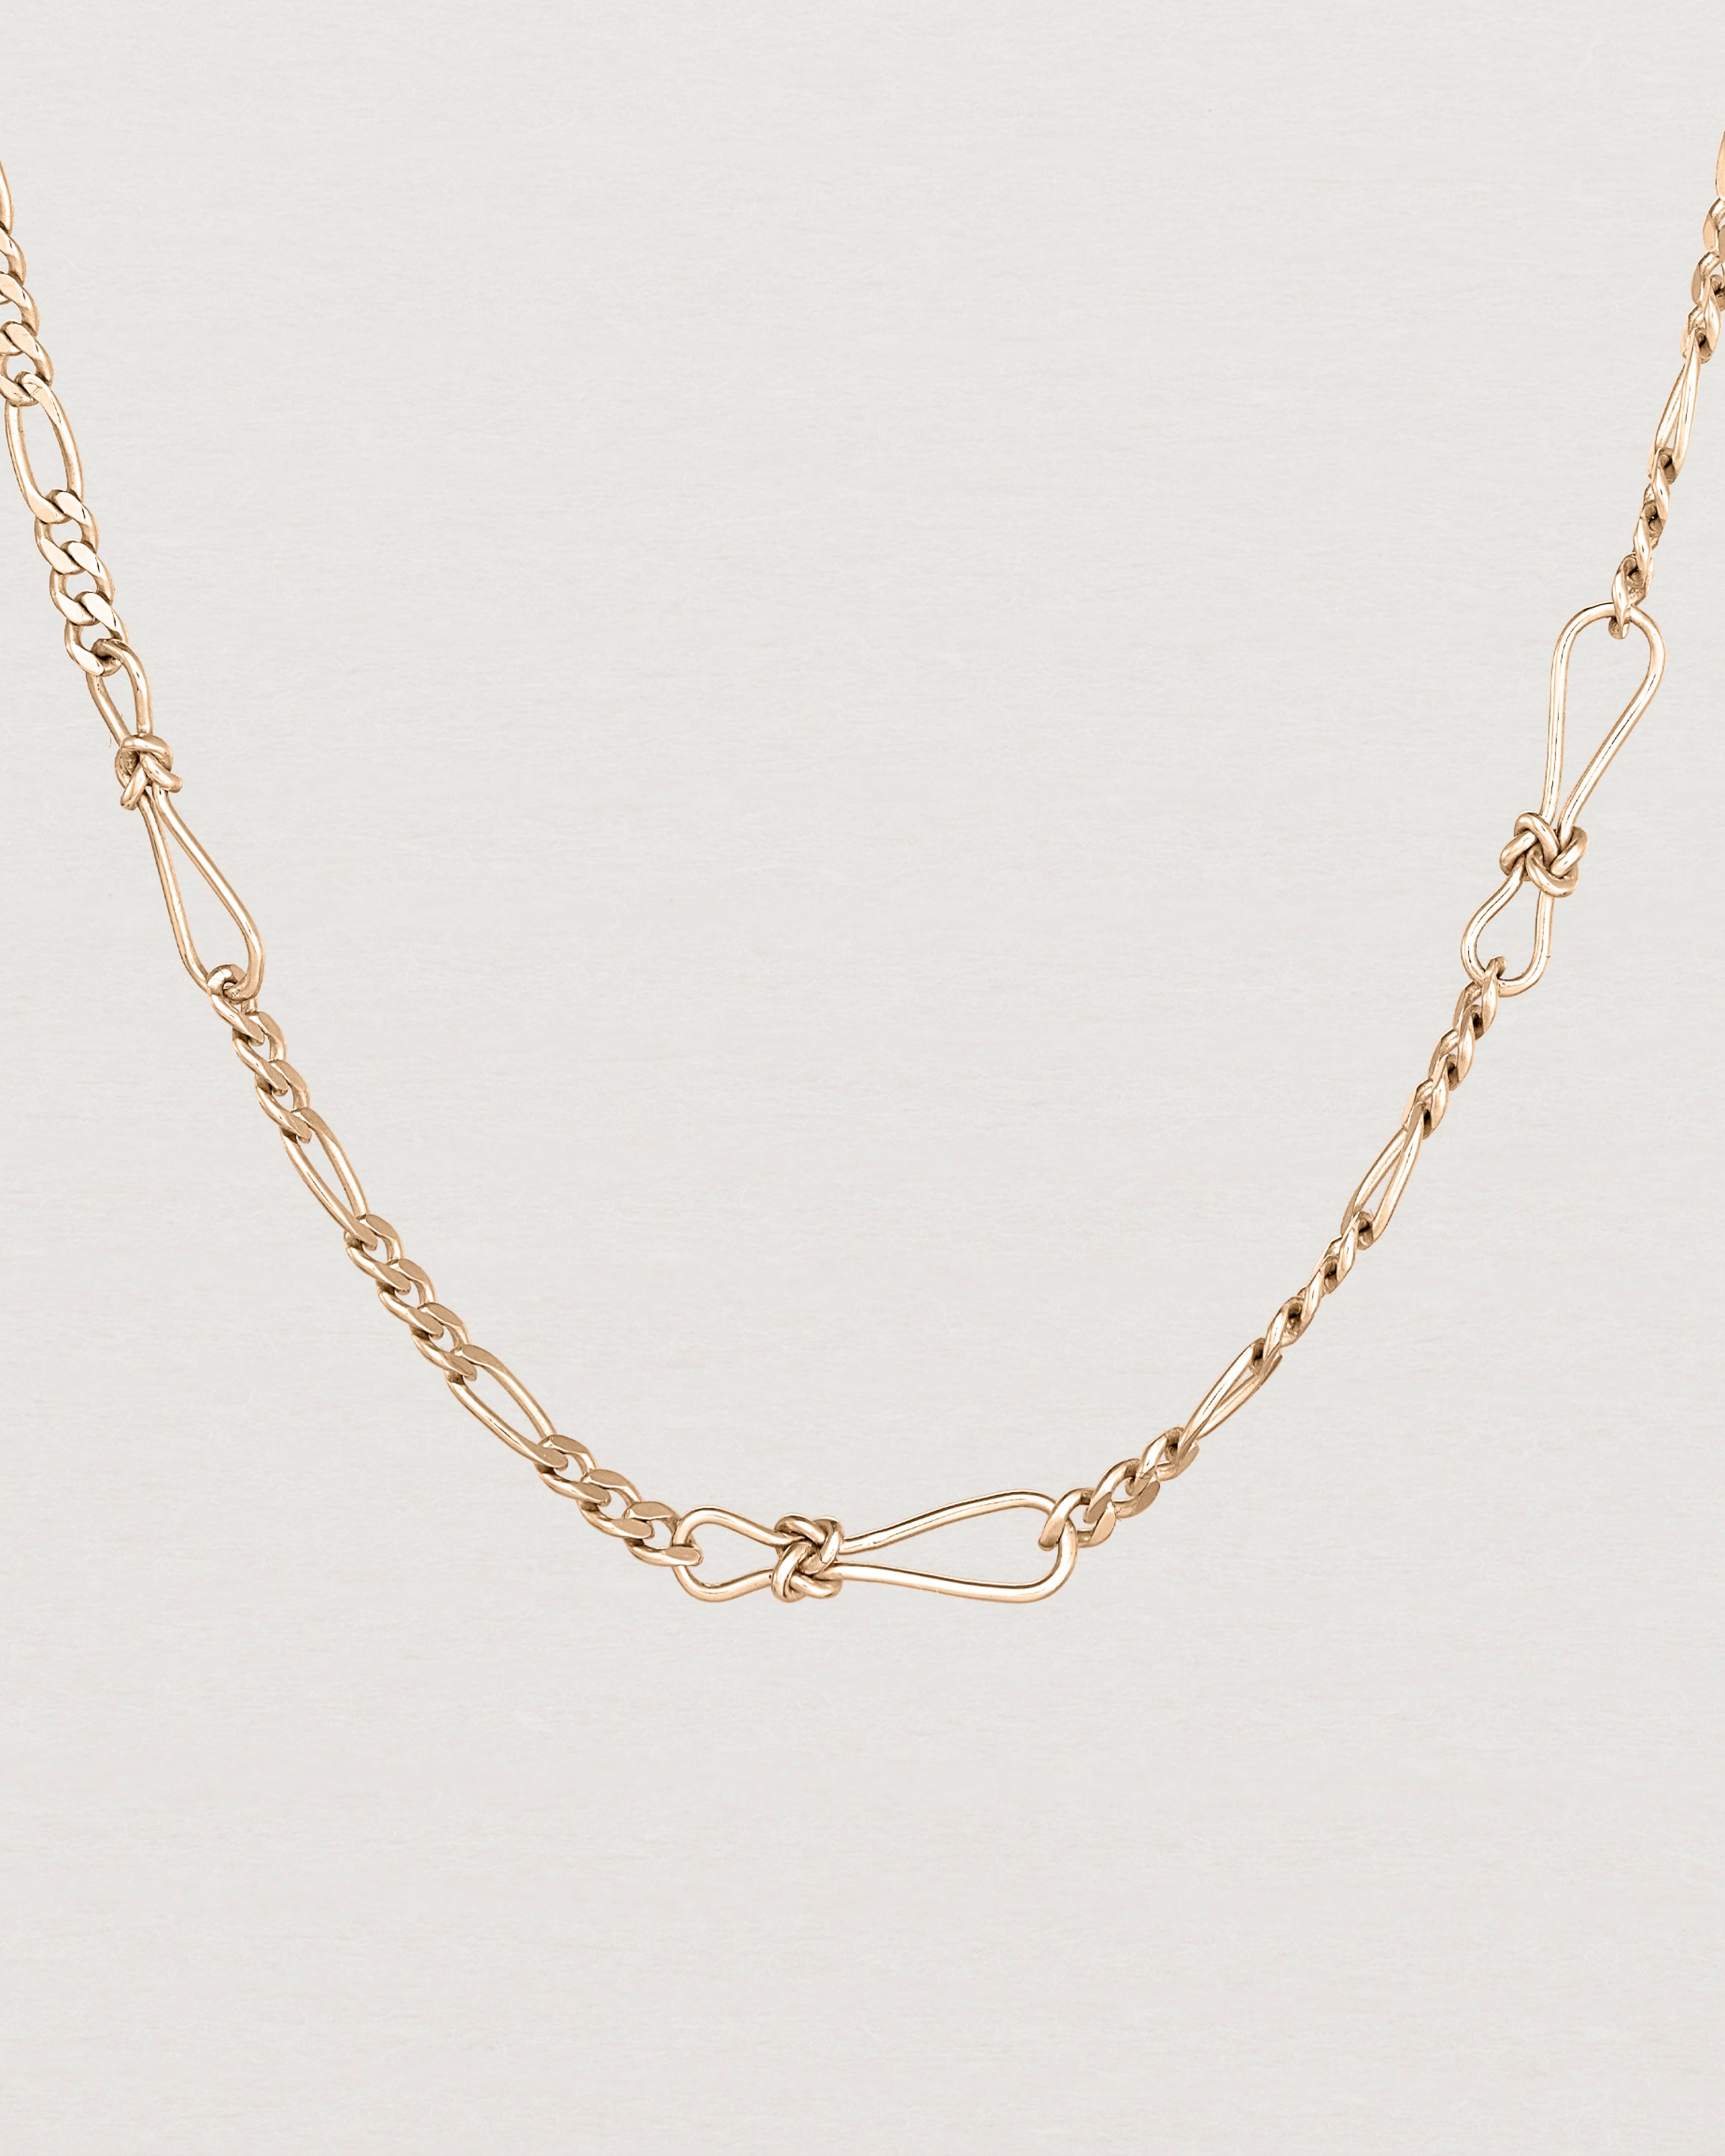 Front view of the Anam Charm Necklace in Rose Gold.